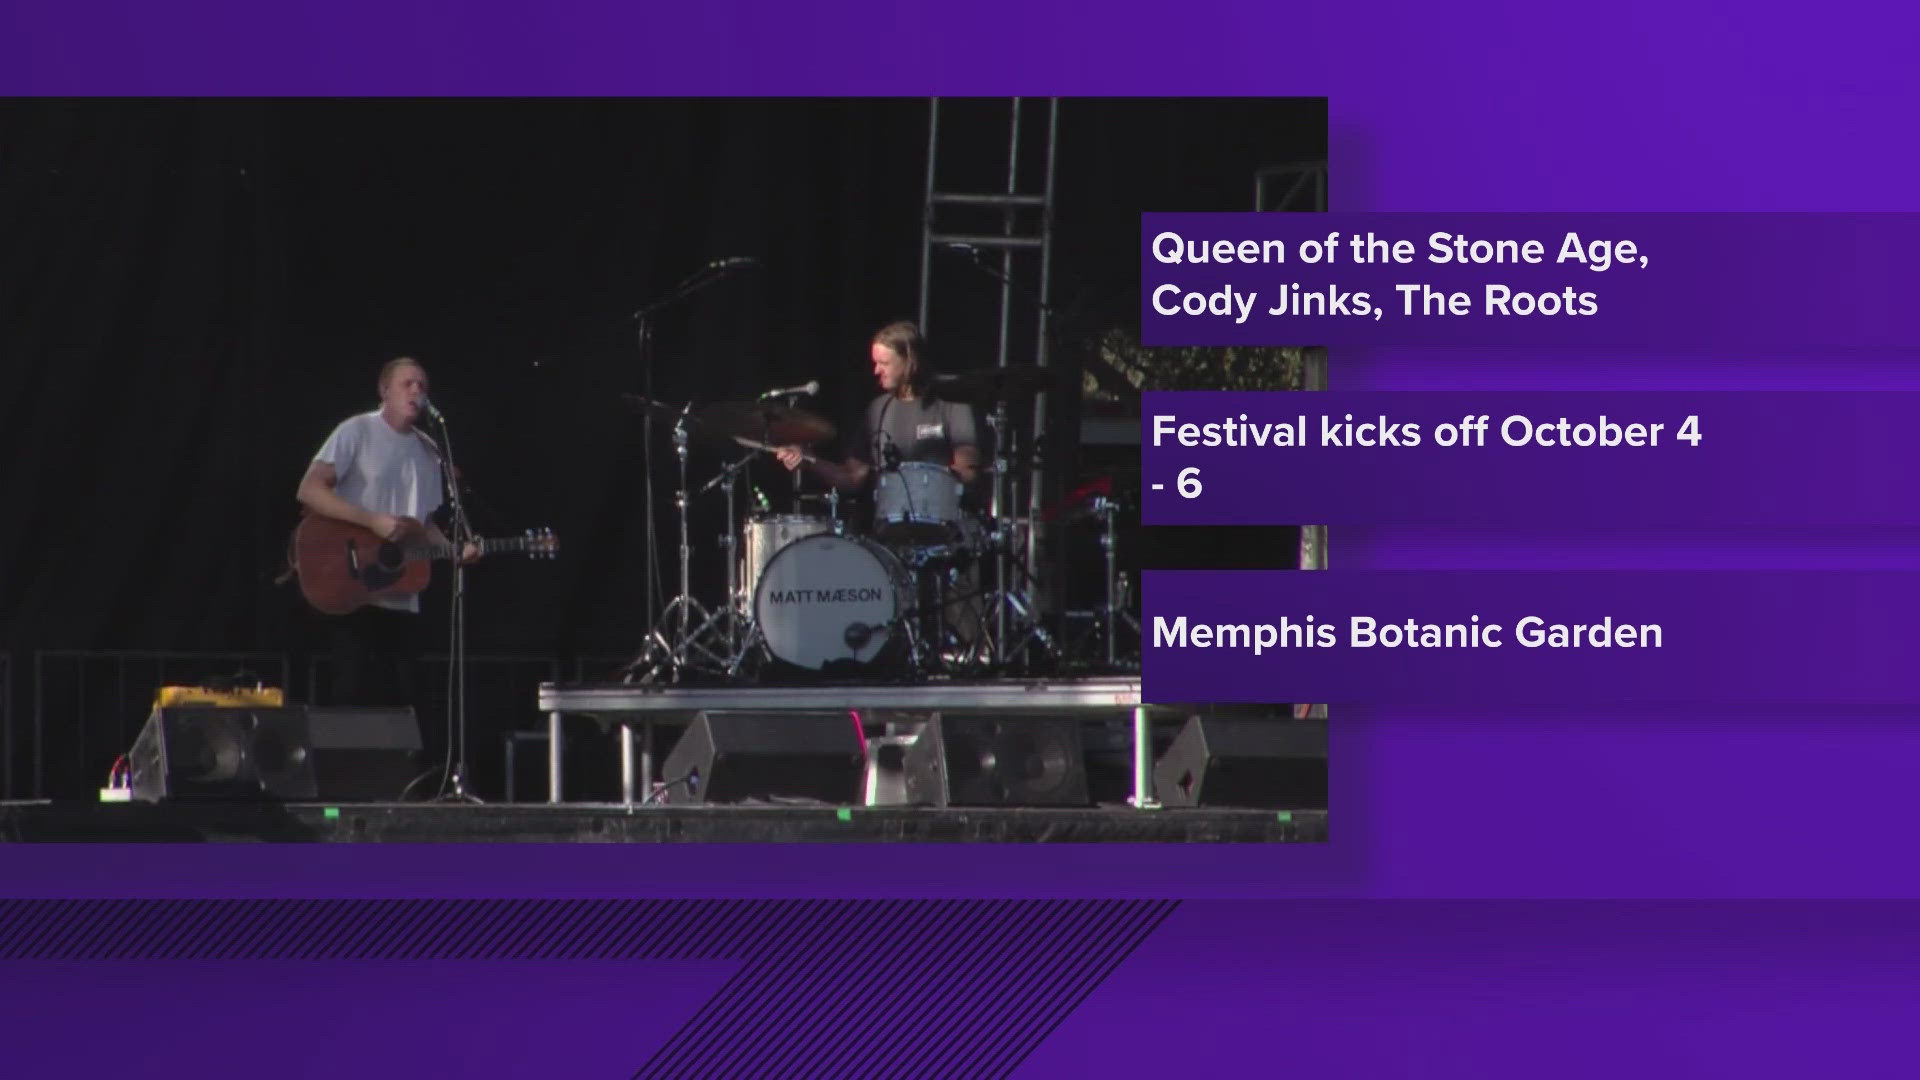 Queens of the Stone Age, Cody Jinks, The Roots, and many more are set to hit the stage for the return of the Mempho music festival.